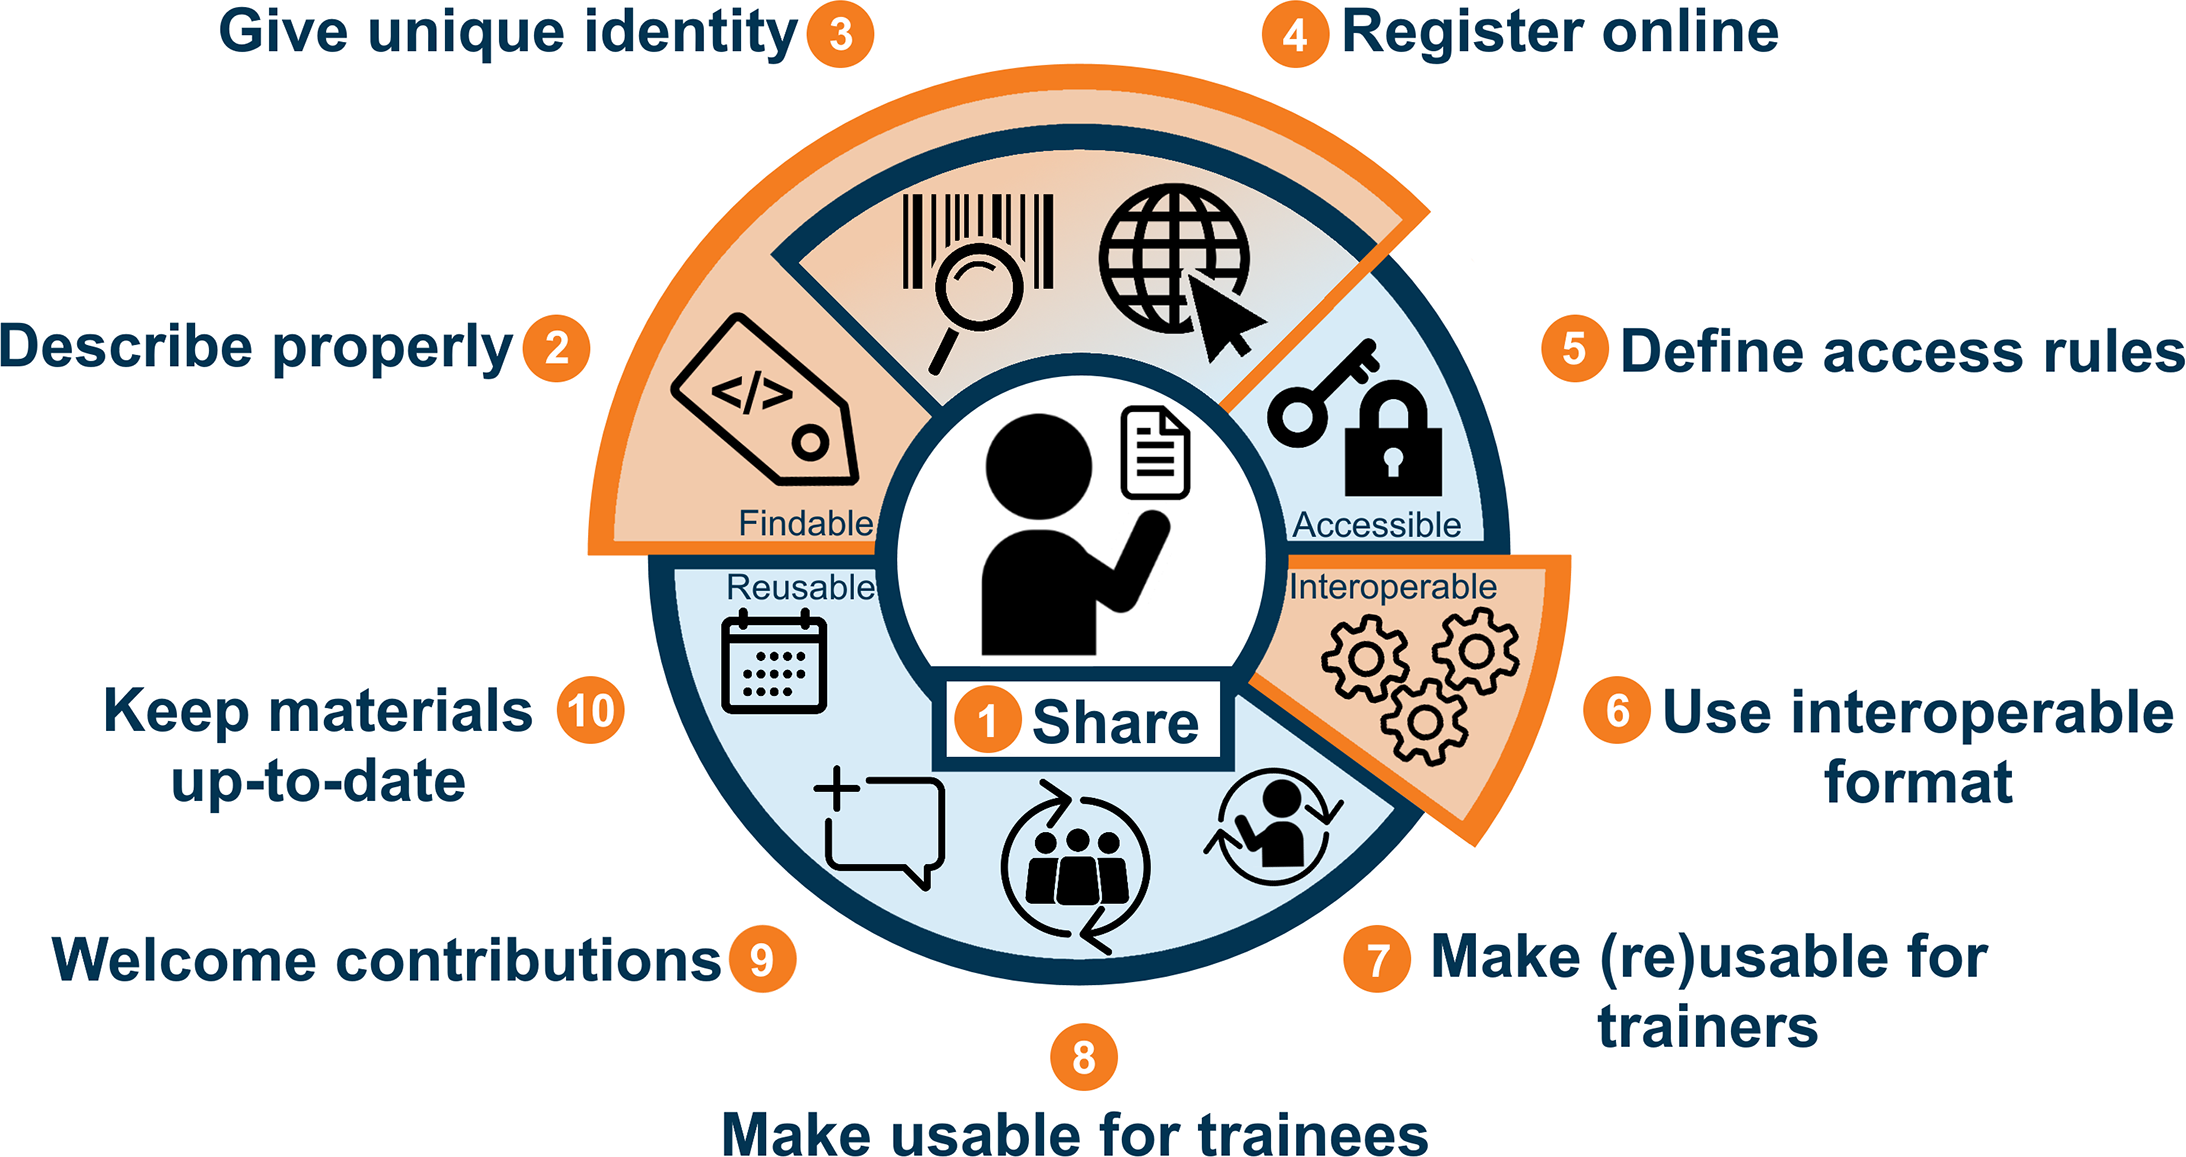 It is like a circle with in the middle "1 - Share" then turning clock wise from left middle: "2 - Describe properly", "3 - Give unique identity", "4 - Register online", "5 - Define access rules", "6 - Use interoperable format", "7 - Make (re)usable for trainers", "8 - Make usable for trainees", "9 - Welcome contributions", "10 - Keep material up-to-date". On the top of rules, "Findable" for 2, 3, 4, "Accessible" for 3, 4, 5, "Interroperable" for 6, "Reusable" for 7, 8, 9, 10. 